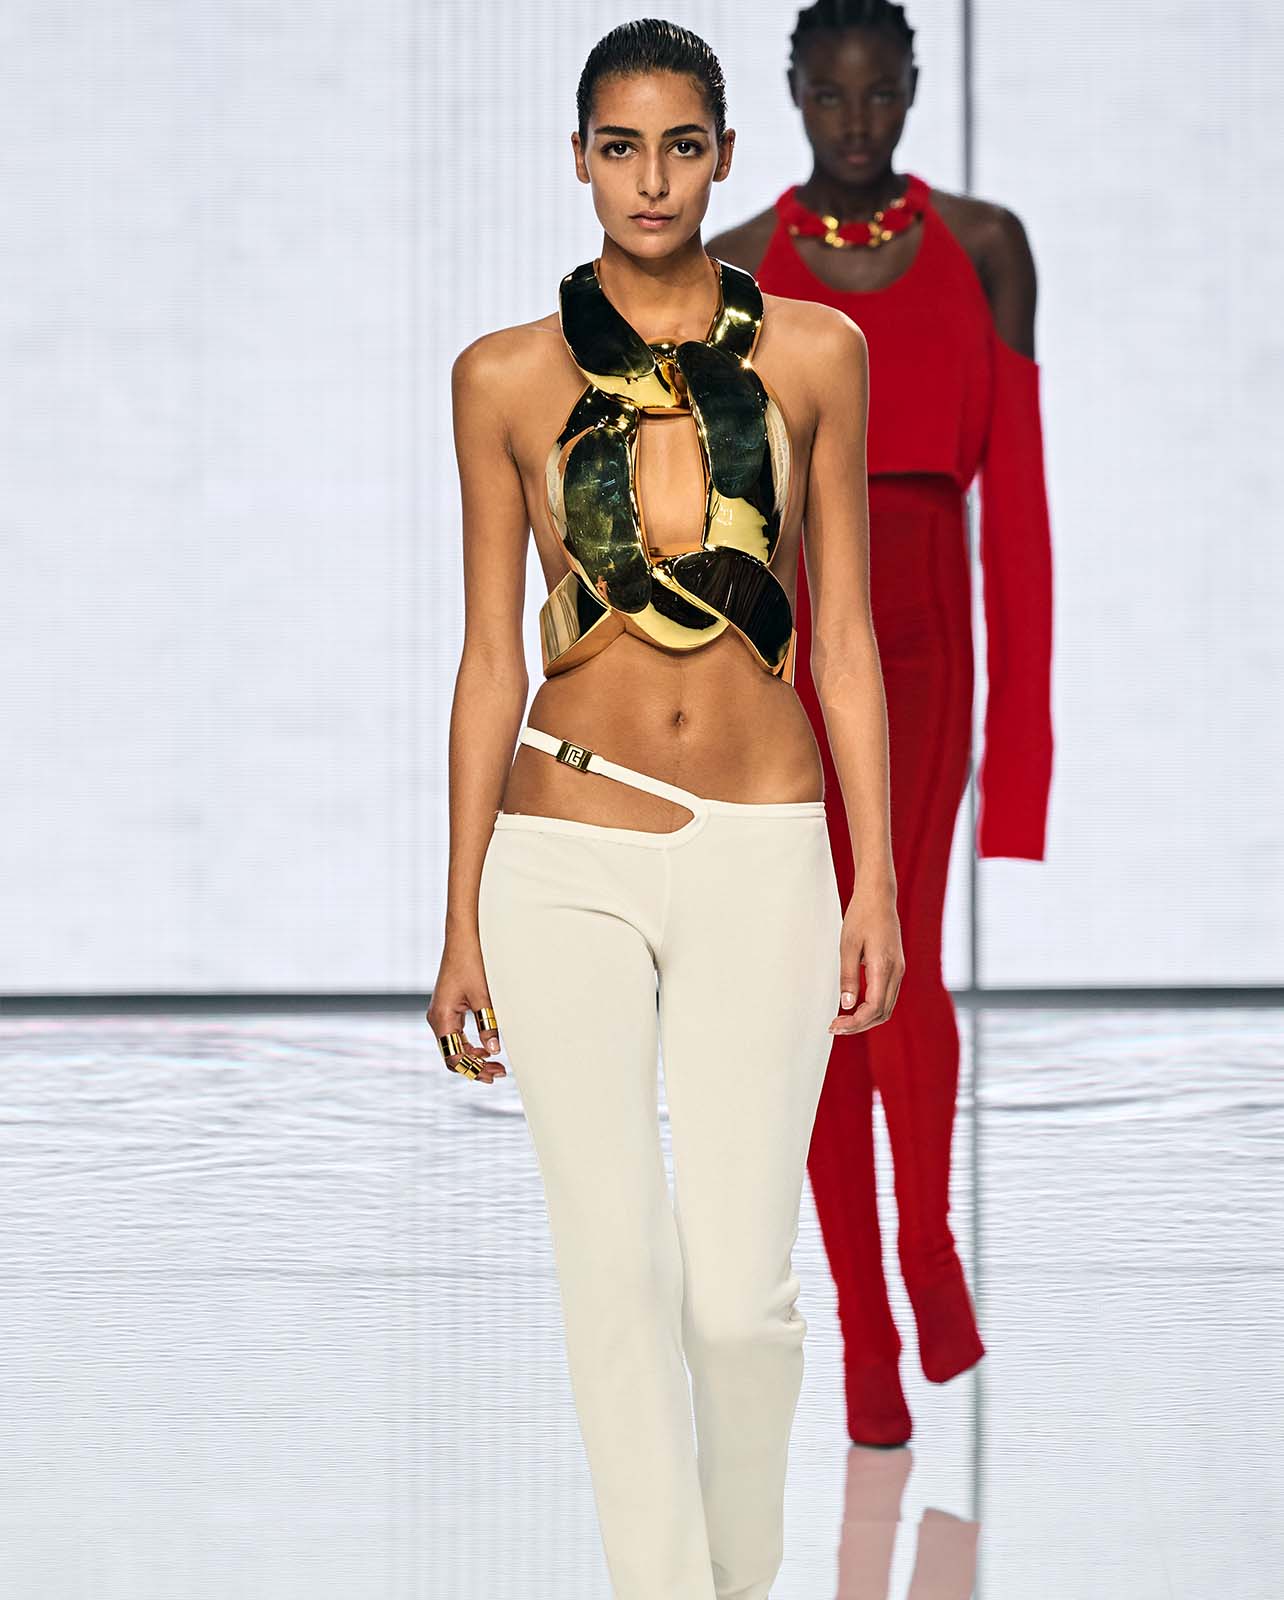 Model walking on runway in a gold chain style top